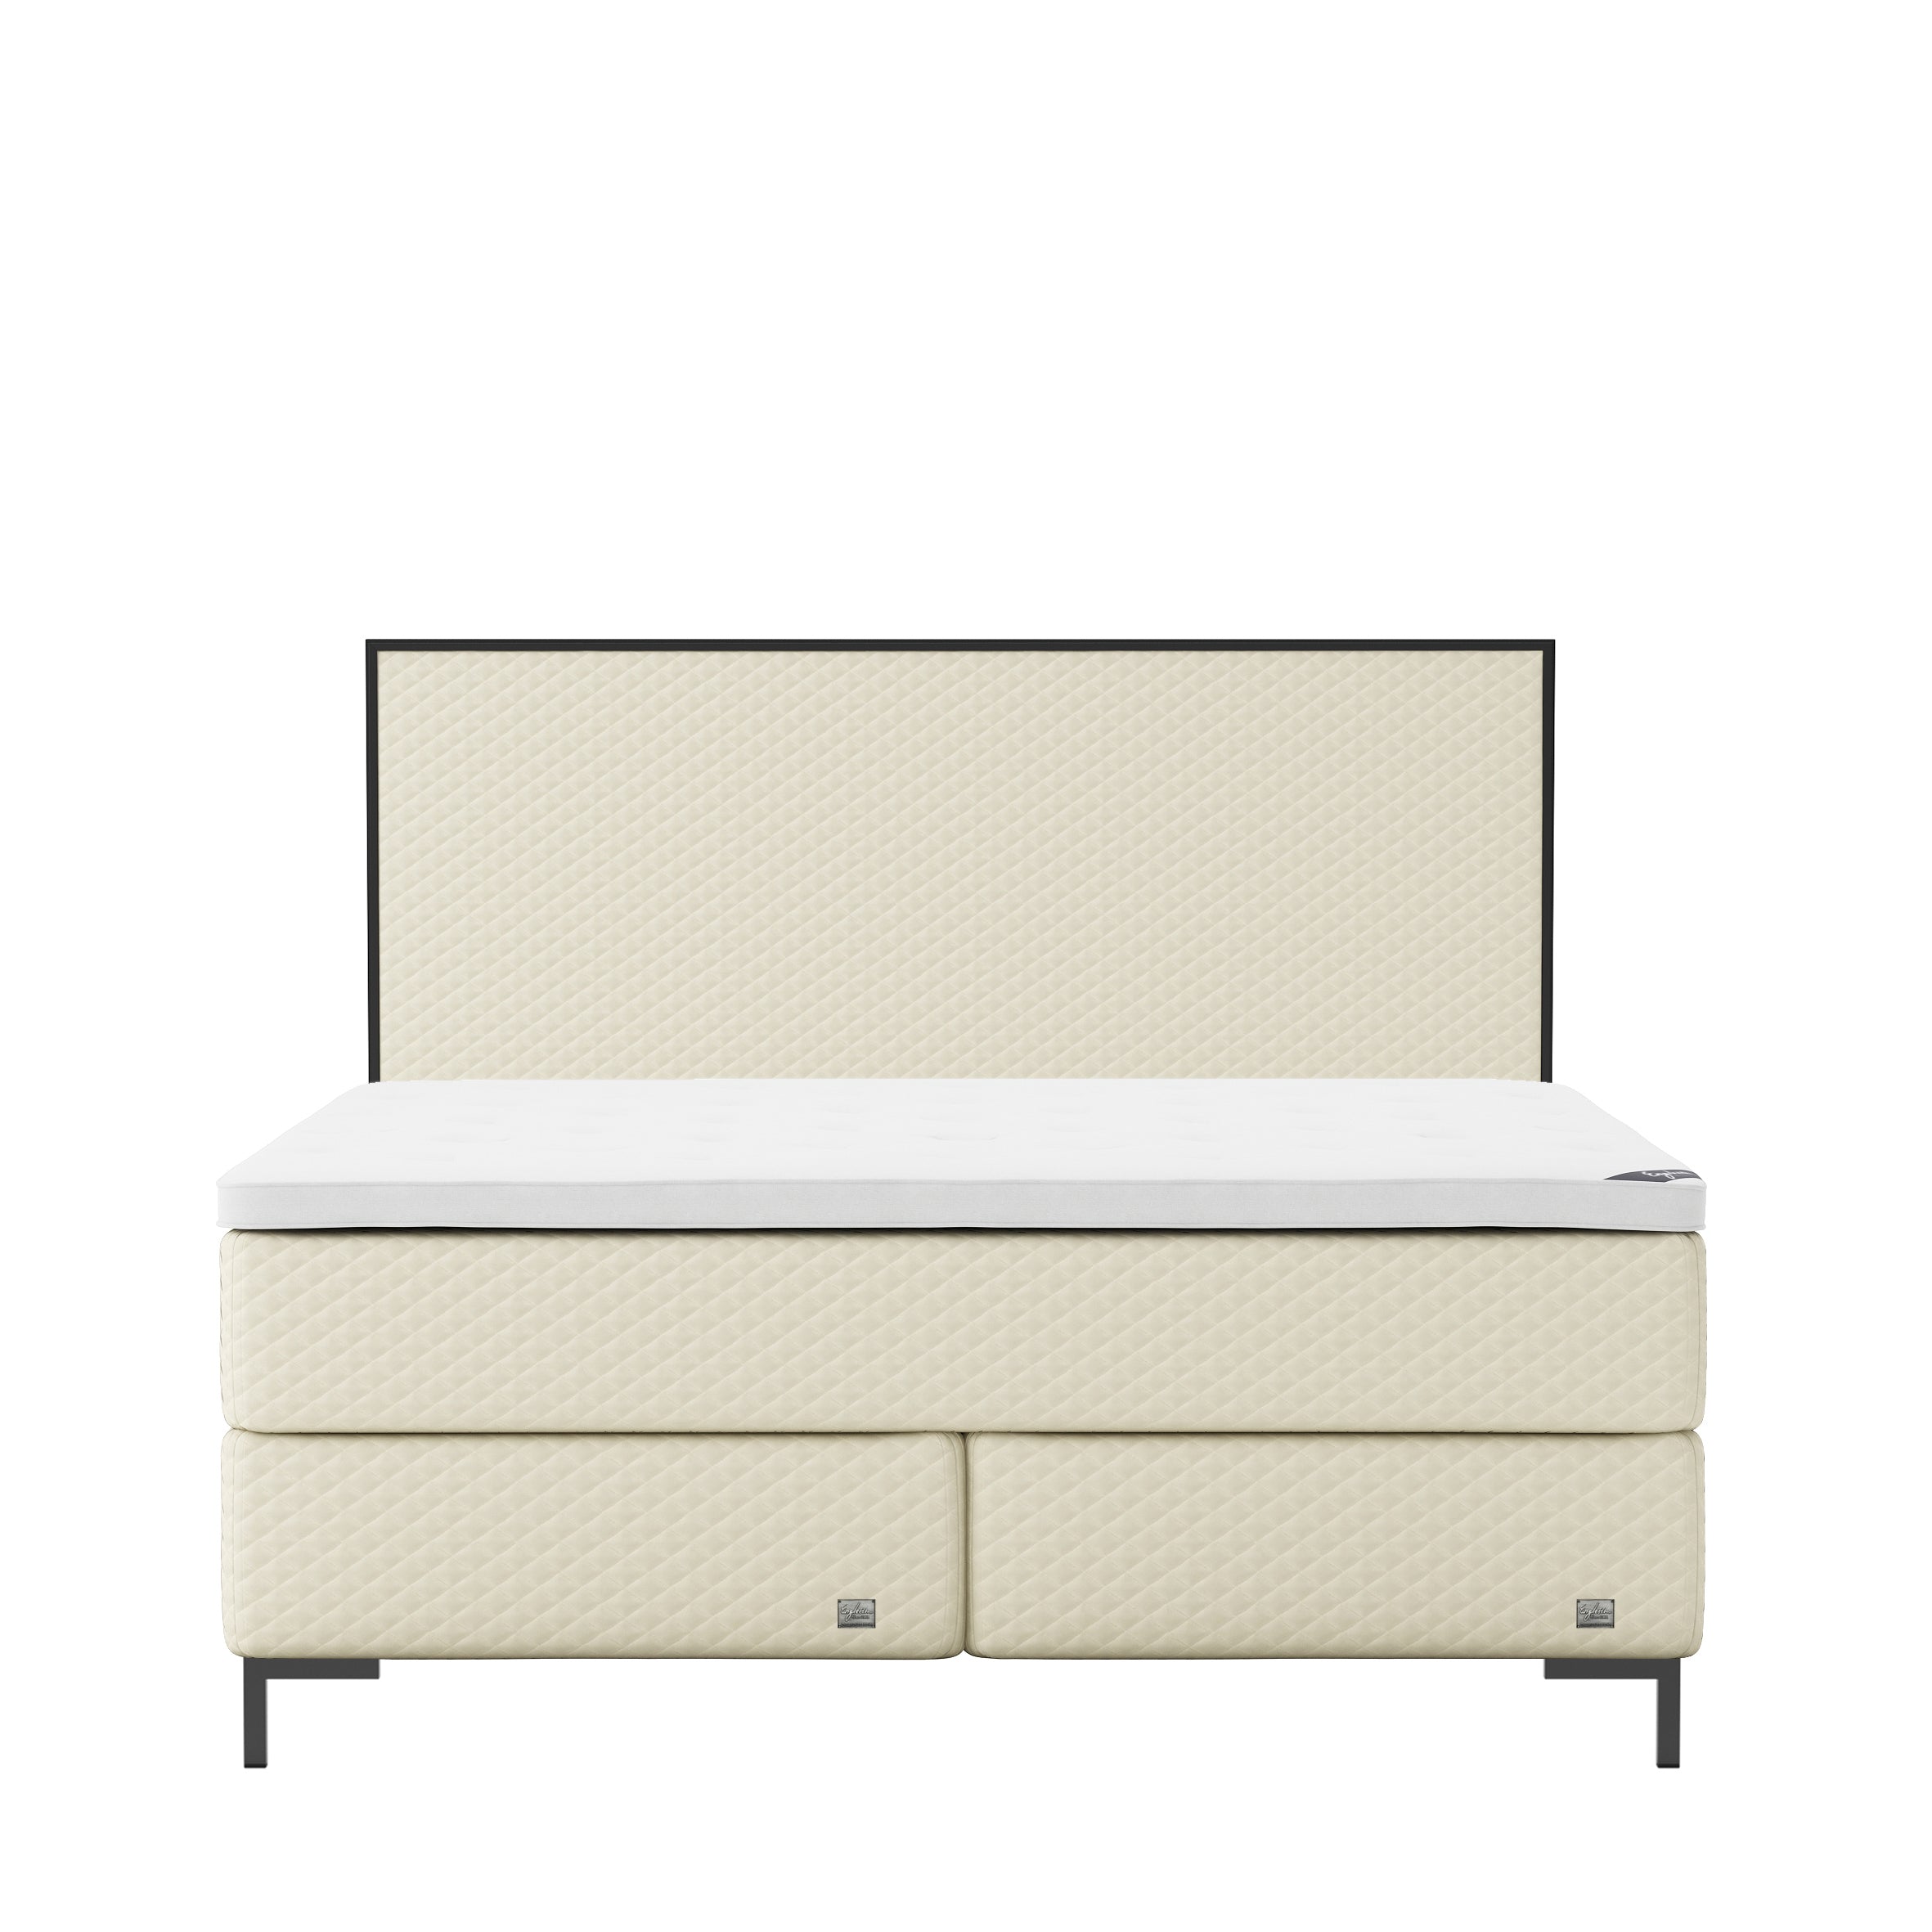 Englesson Beds Pearl / 160 x 200 Superior Kontinental High Frame SC160MF20 #Färg_Pearl